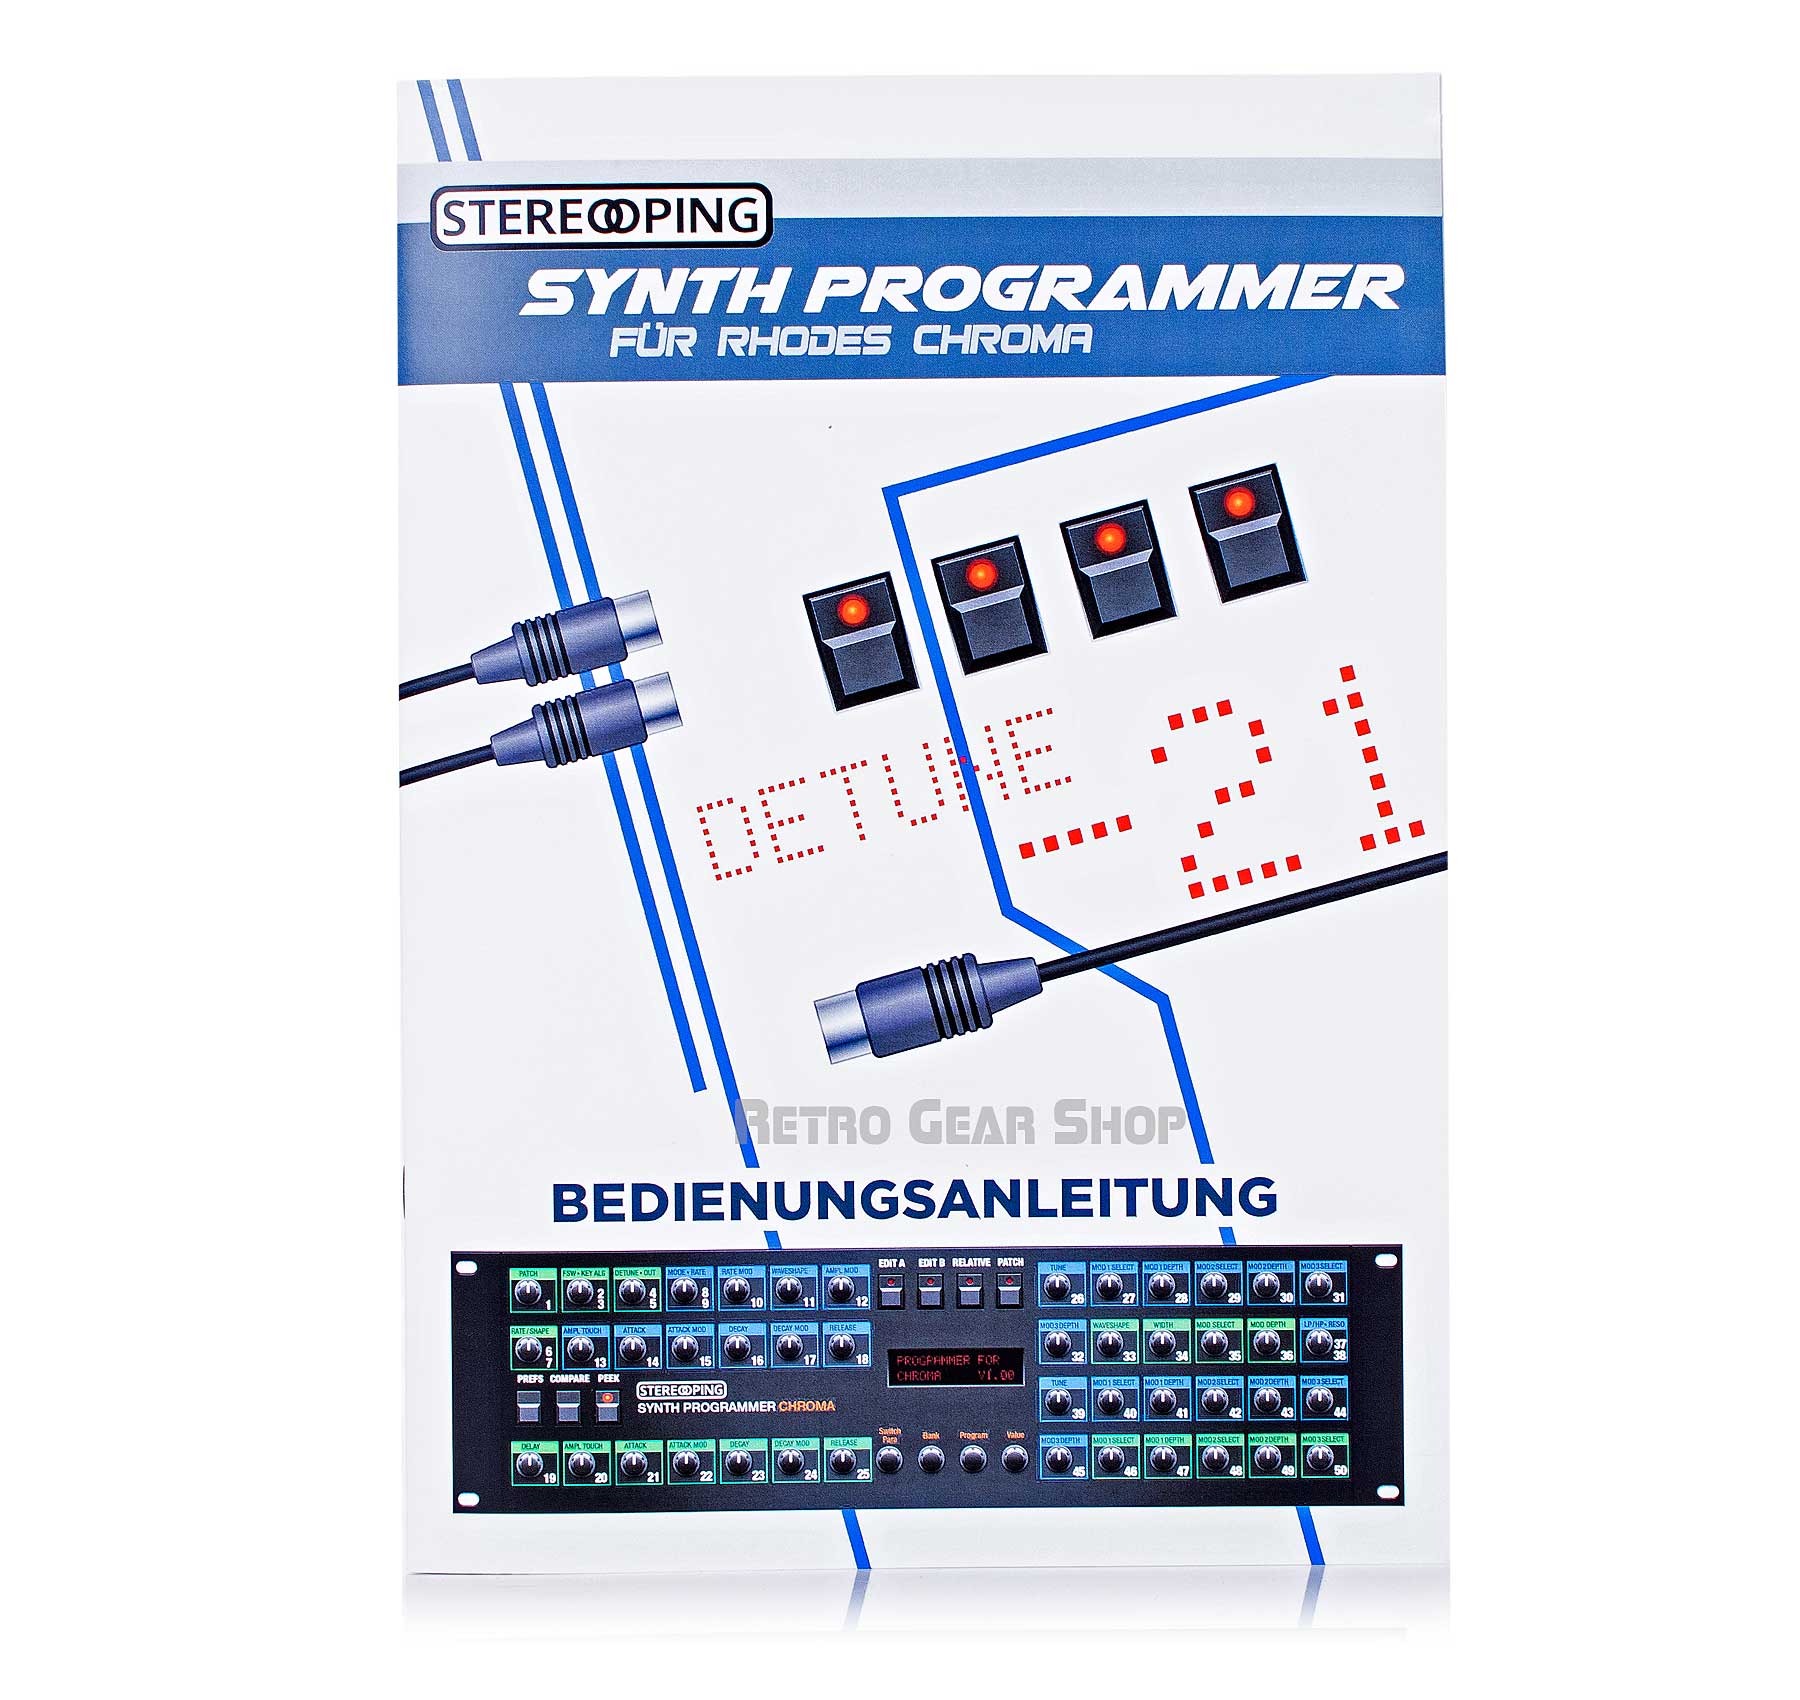 Stereoping Programmer Rhodes Chroma Manual